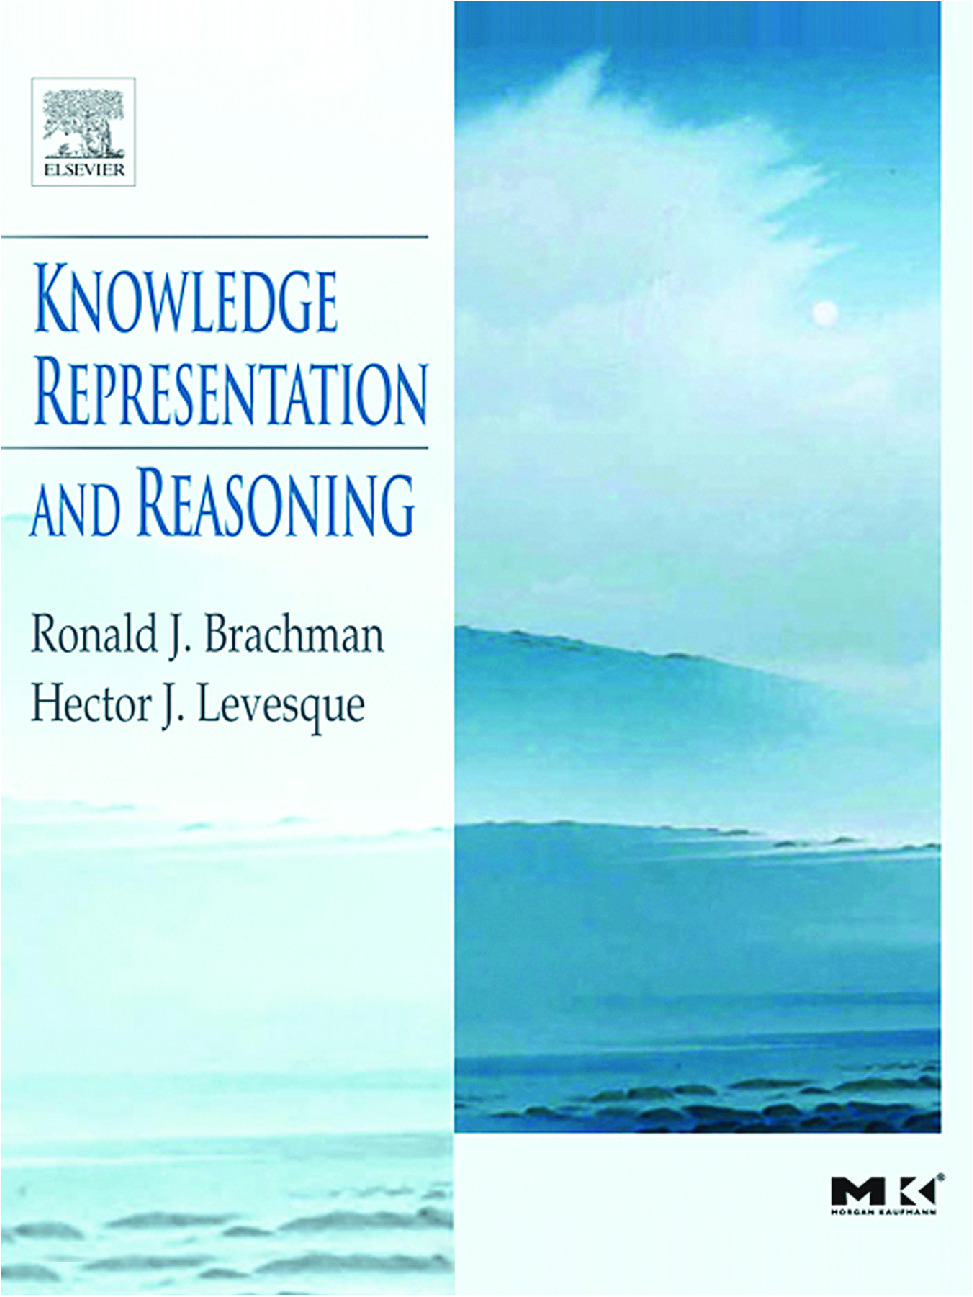 (Brachman, Levesque) Knowledge Representation and Reasoning